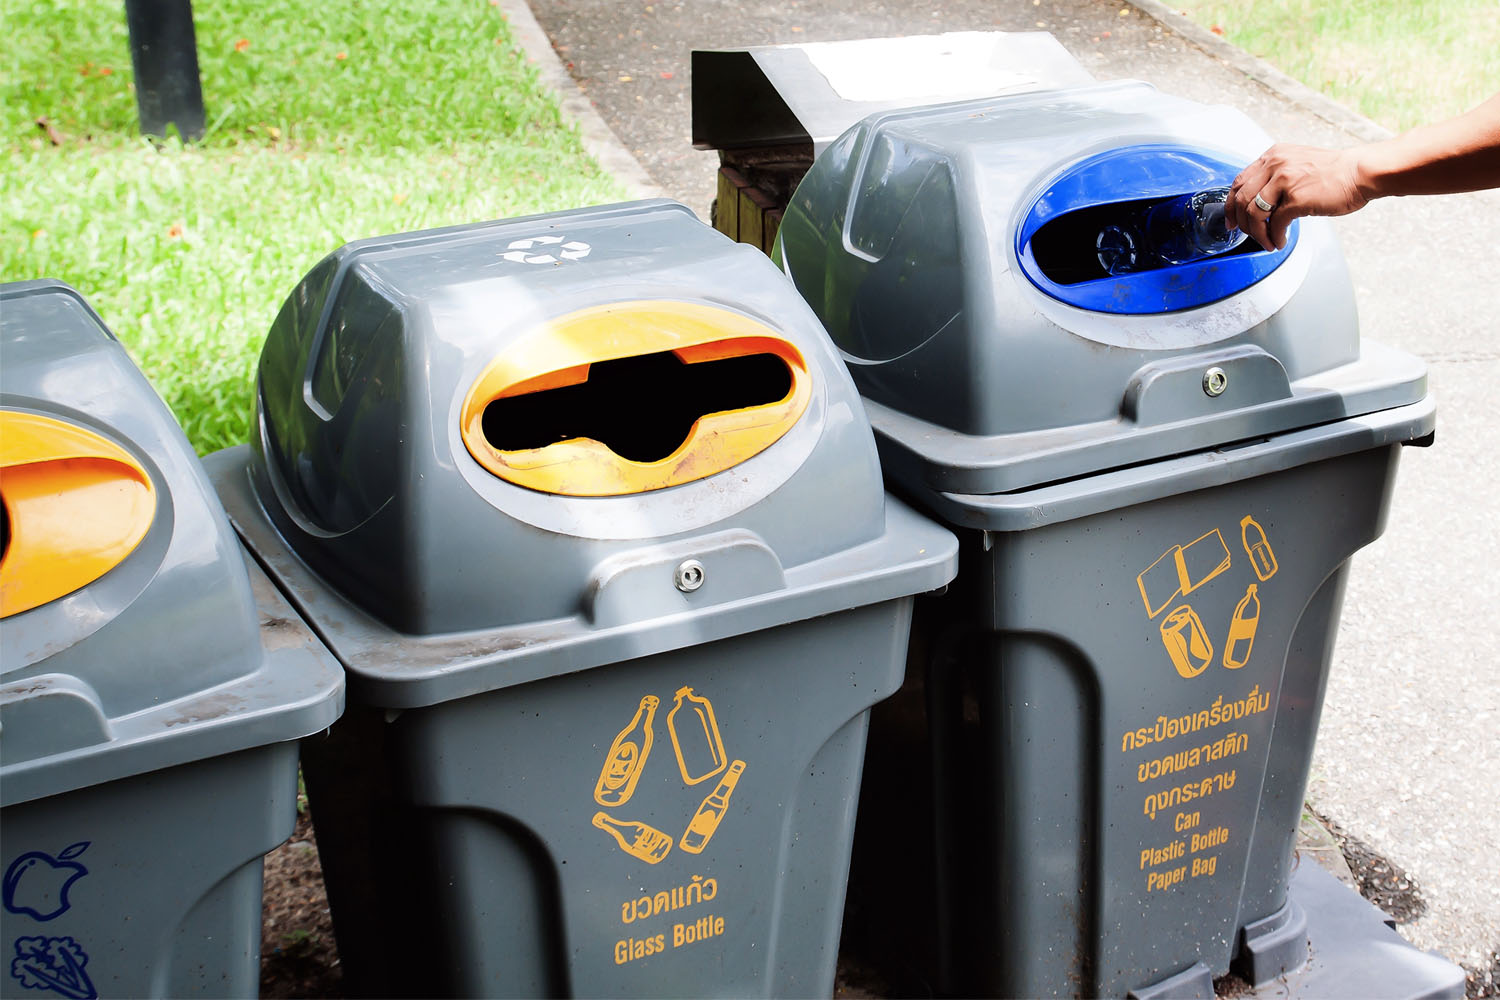 12 municipalities will improve their waste management systems